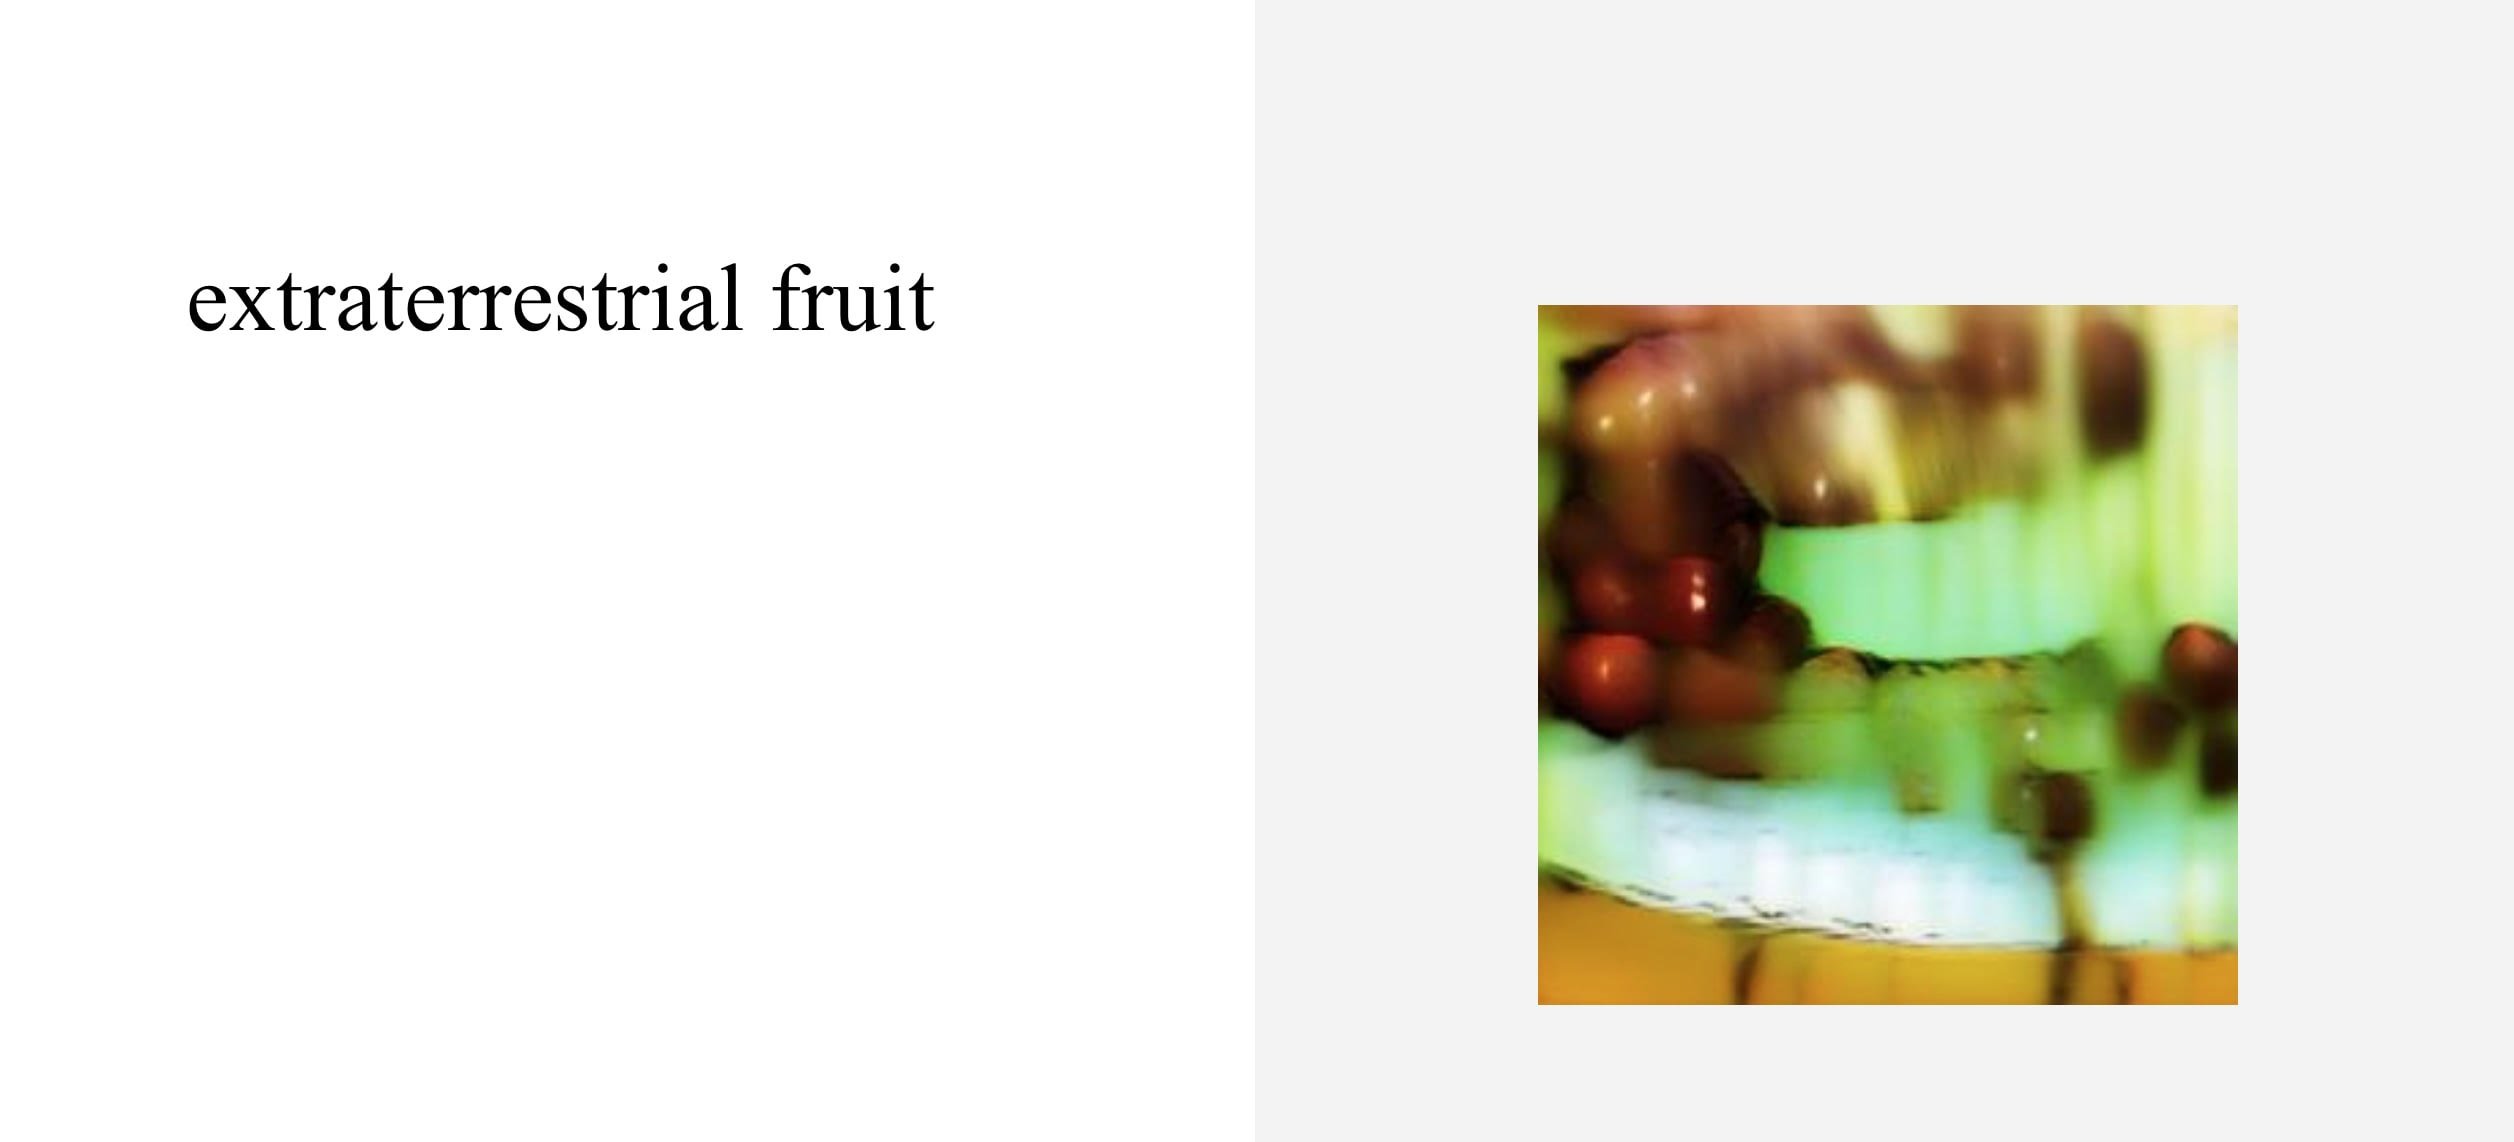 Image of the term "extraterrestrial fruit" generated by artificial intelligence.